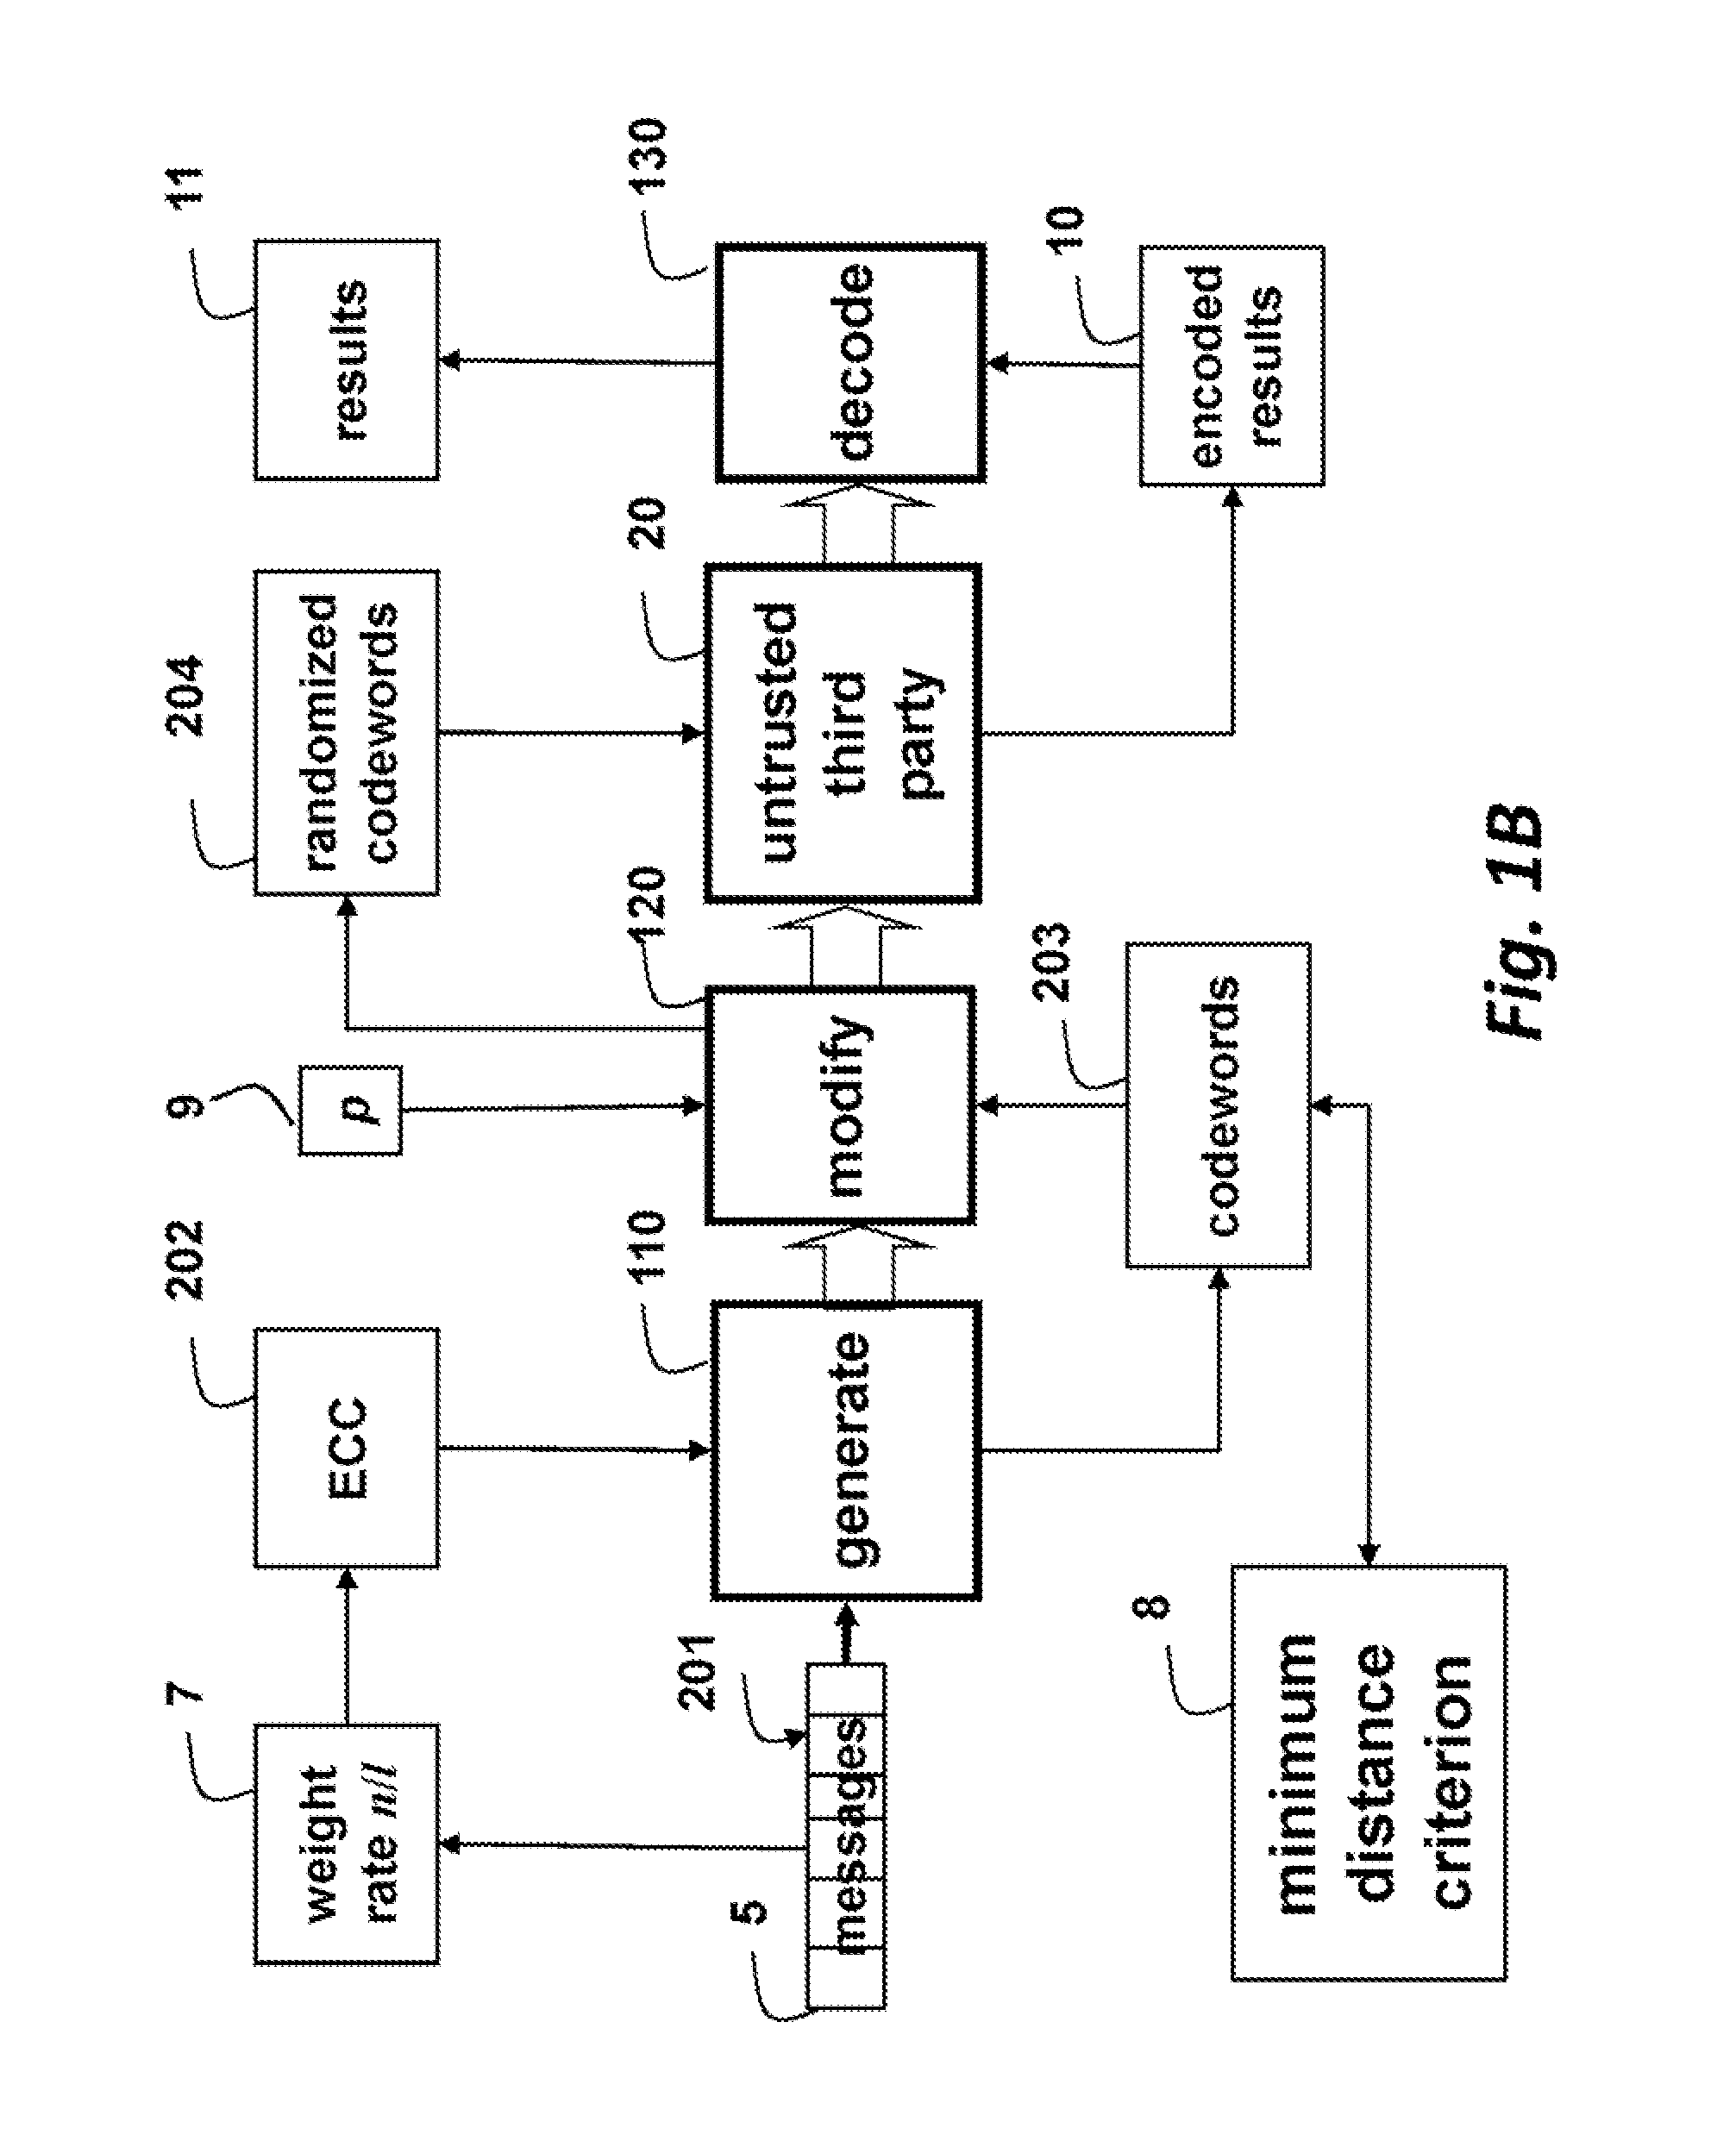 Method for Processing Messages for Outsourced Storage and Outsourced Computation by Untrusted Third Parties